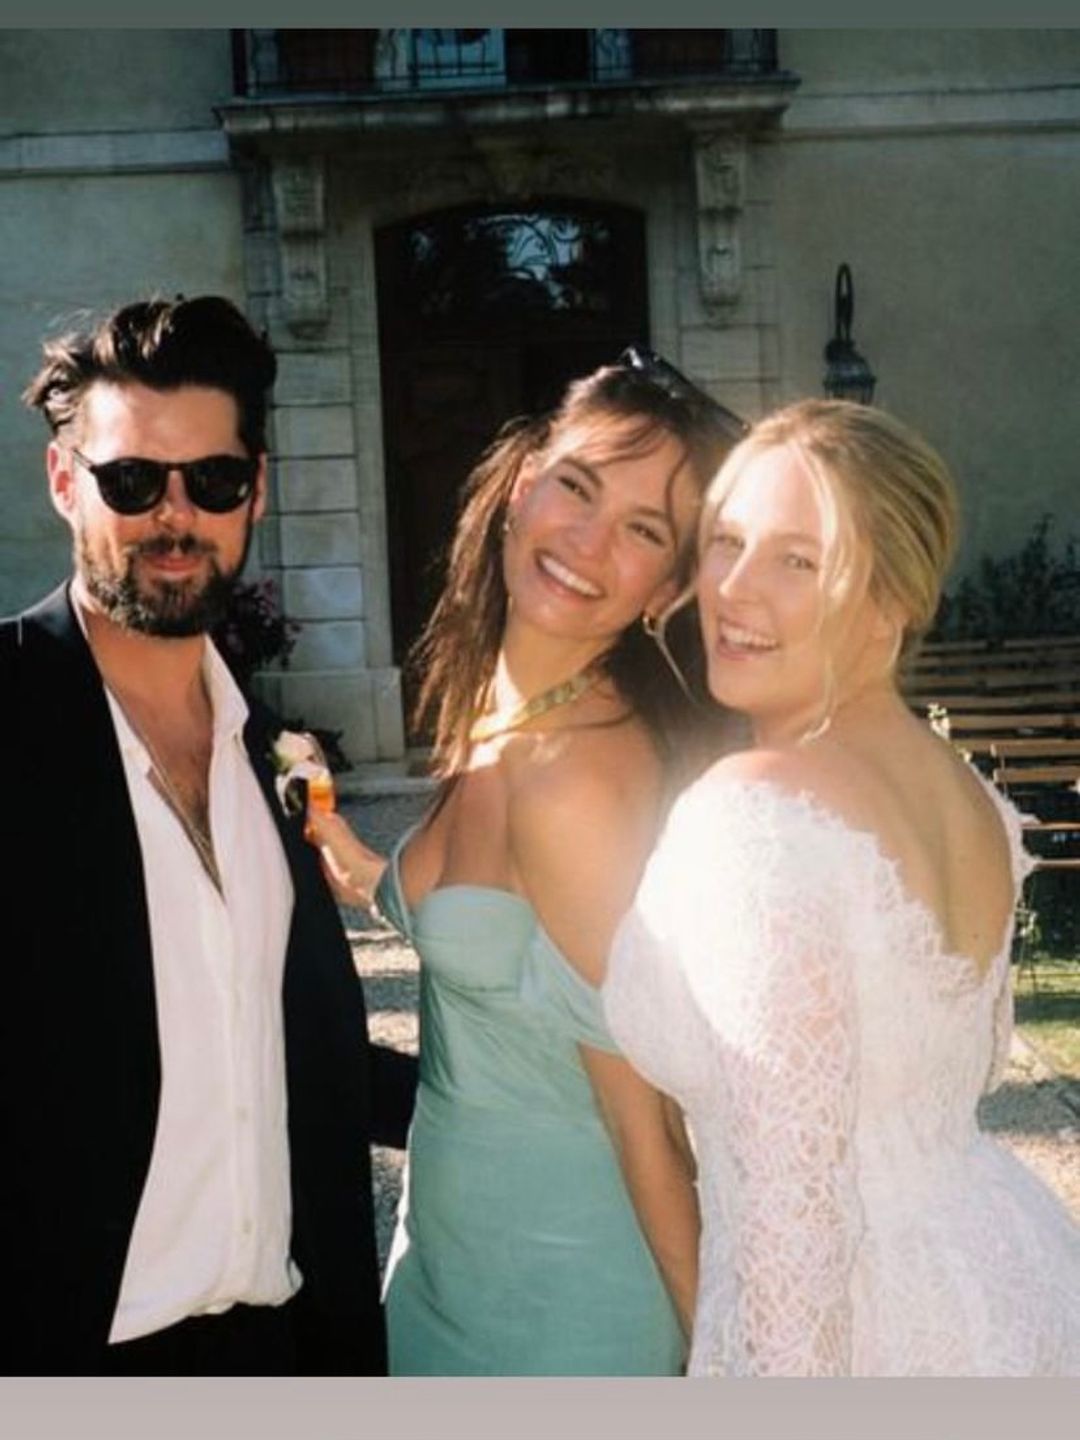 Lily smiling with friends at a wedding 